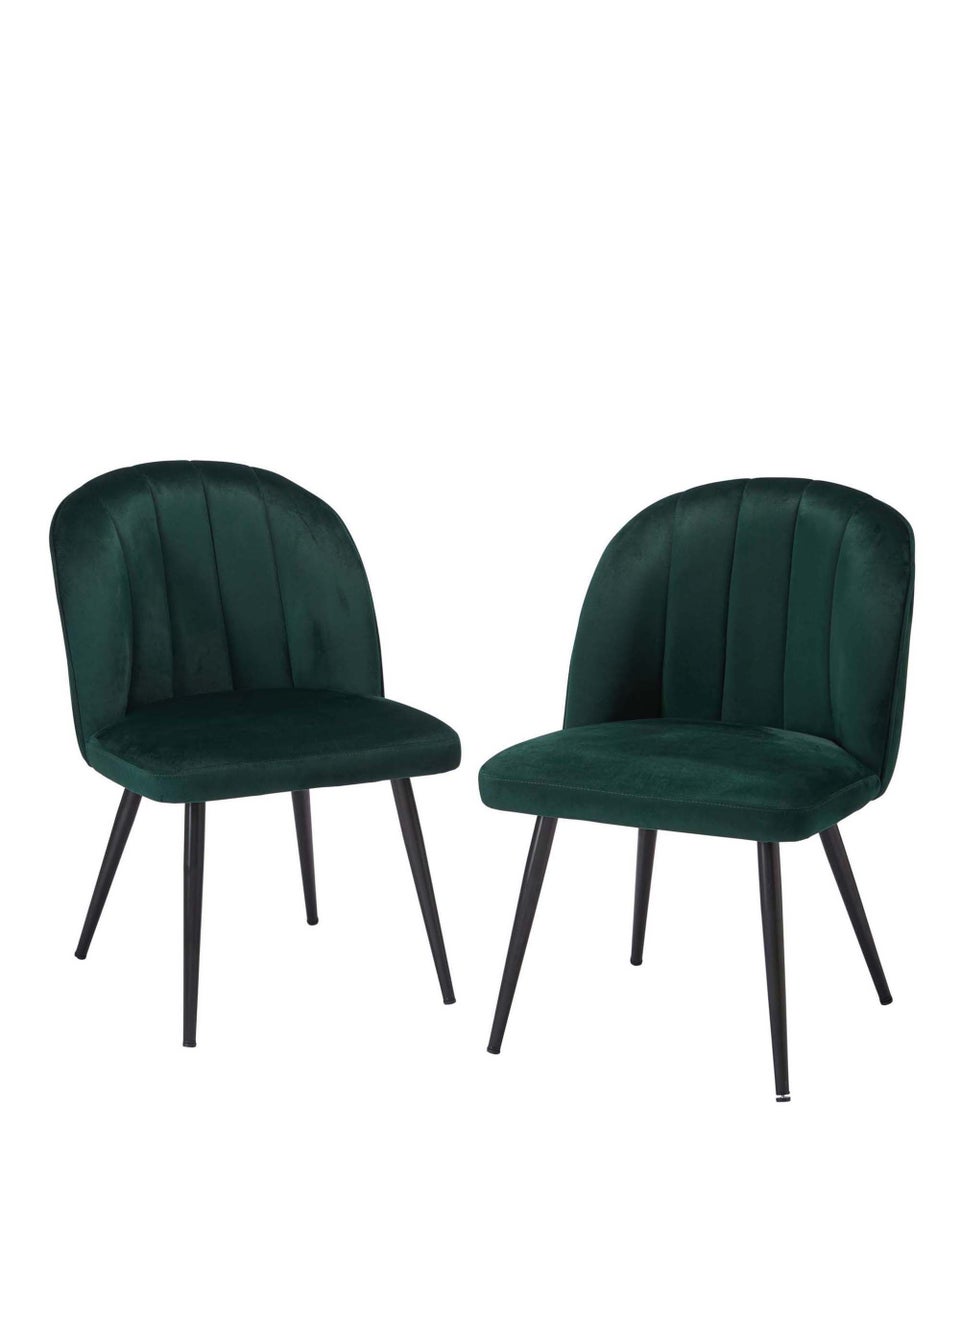 LPD Furniture Set of 2 Orla Dining Chairs Green (815x625x540mm)